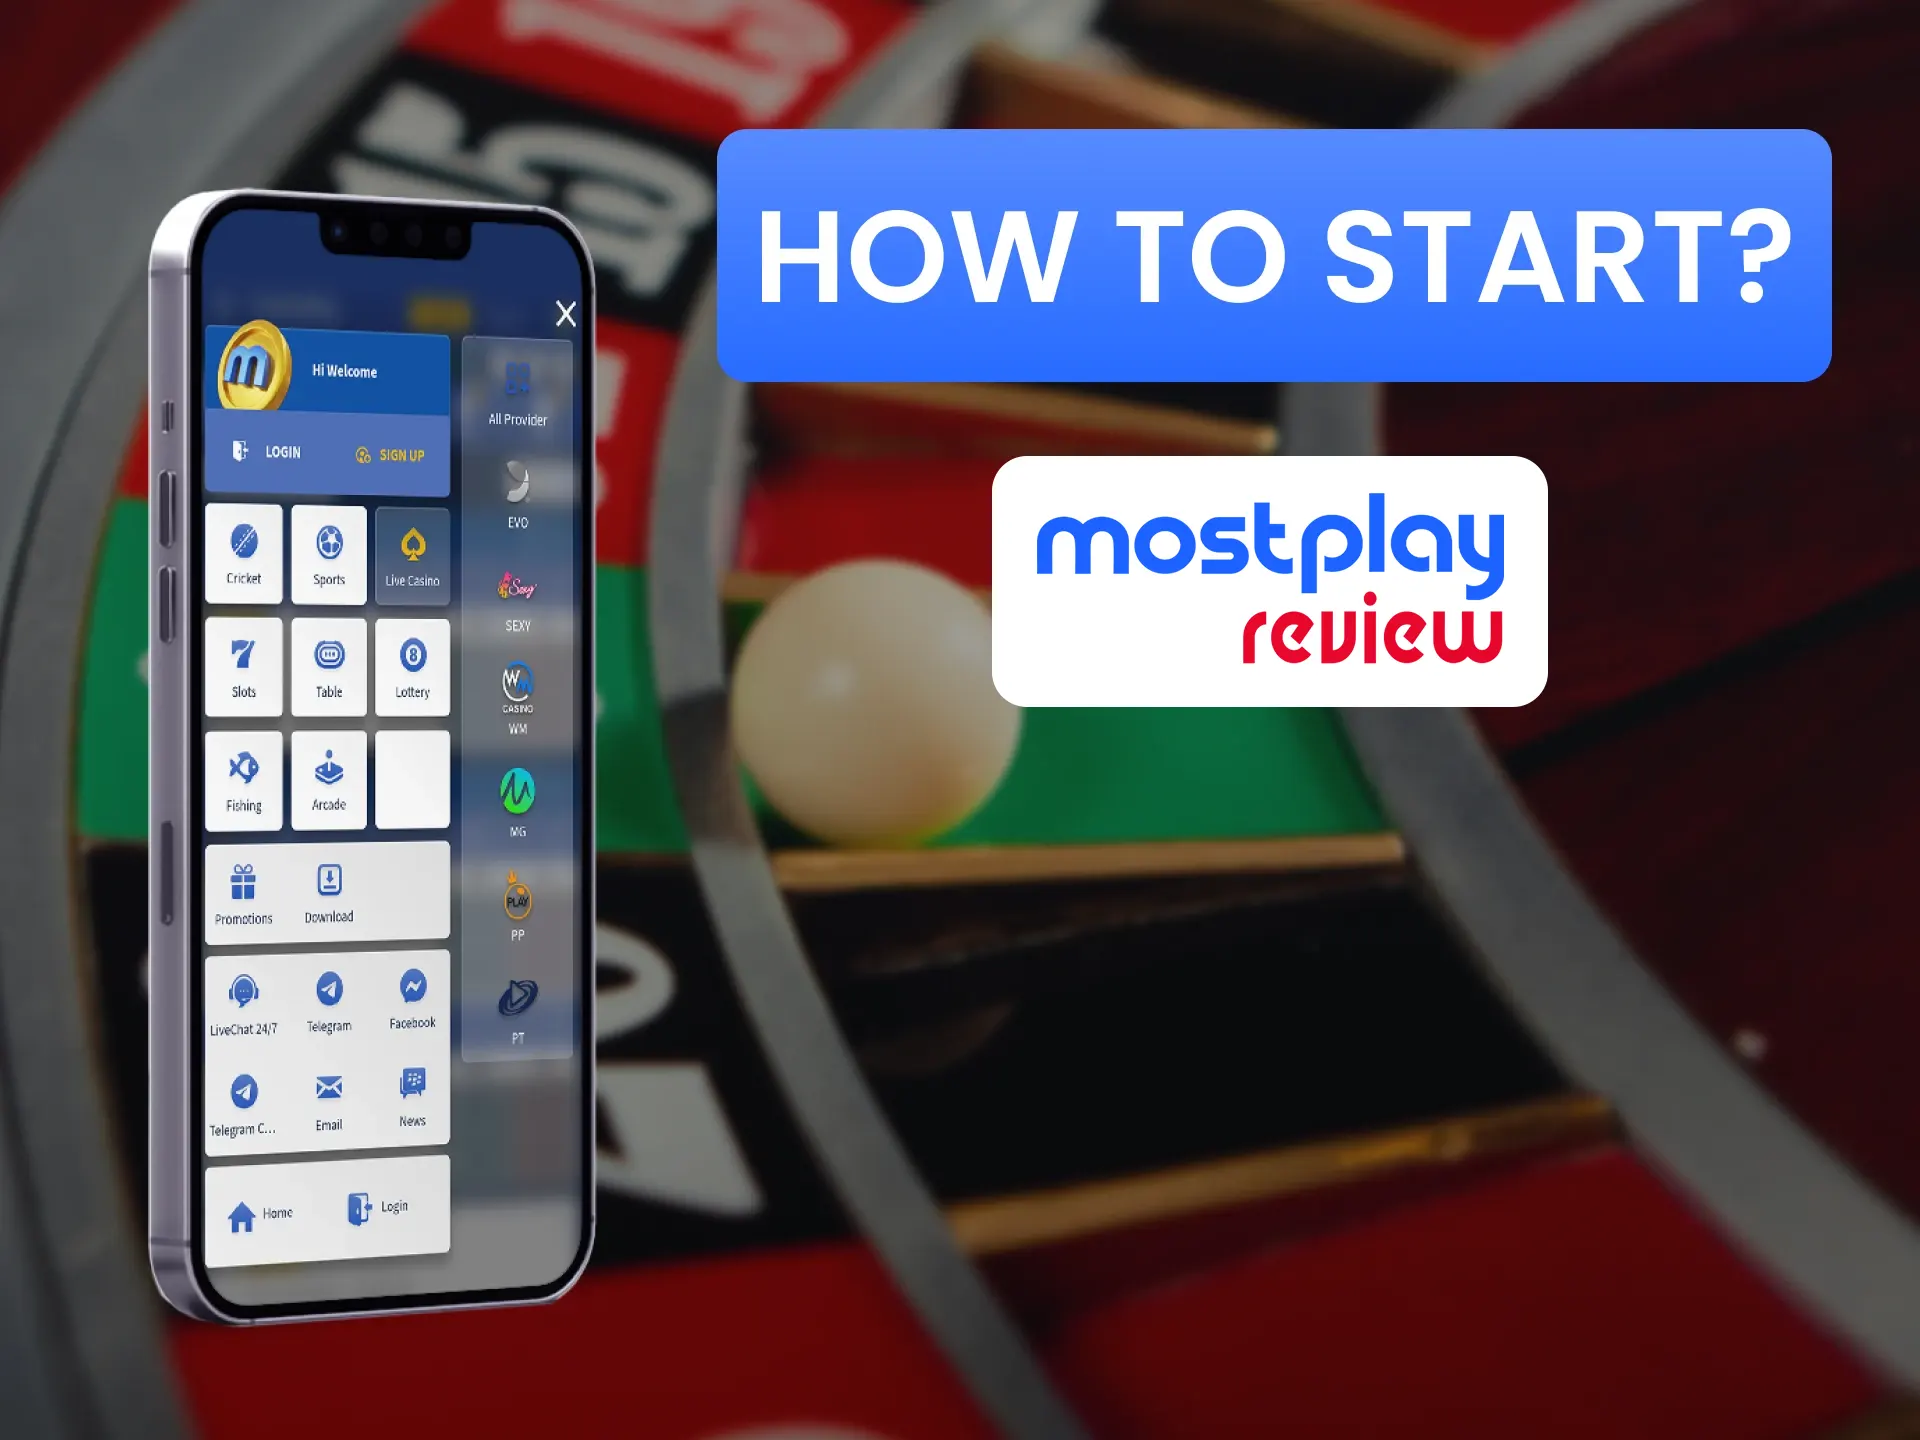 Go to the Live Casino section of Mostplay and enjoy the games.